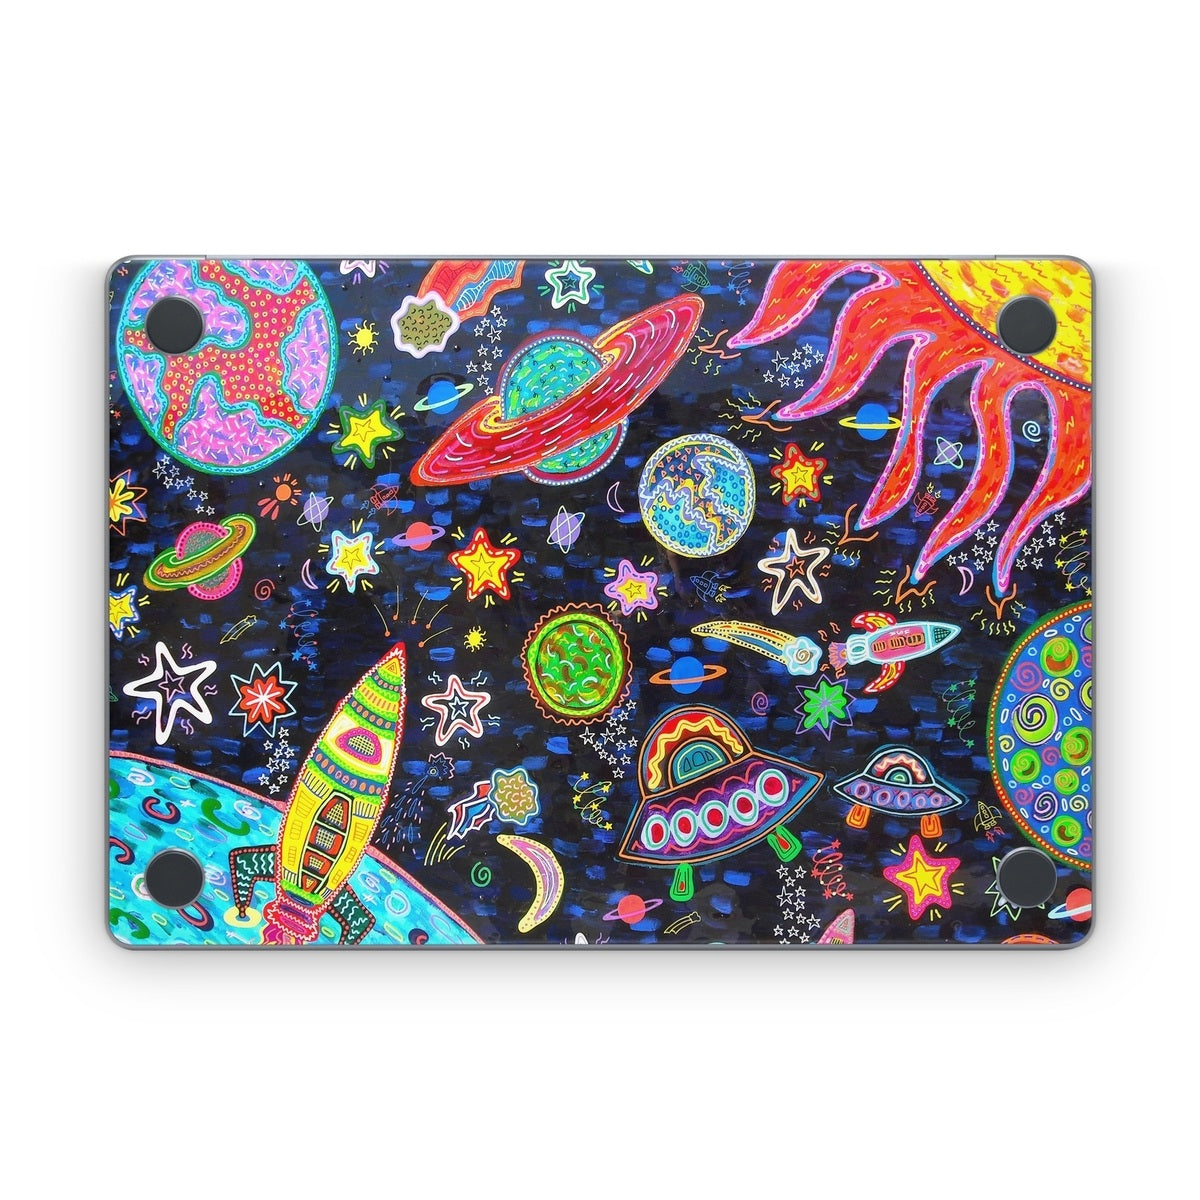 Out to Space - Apple MacBook Skin